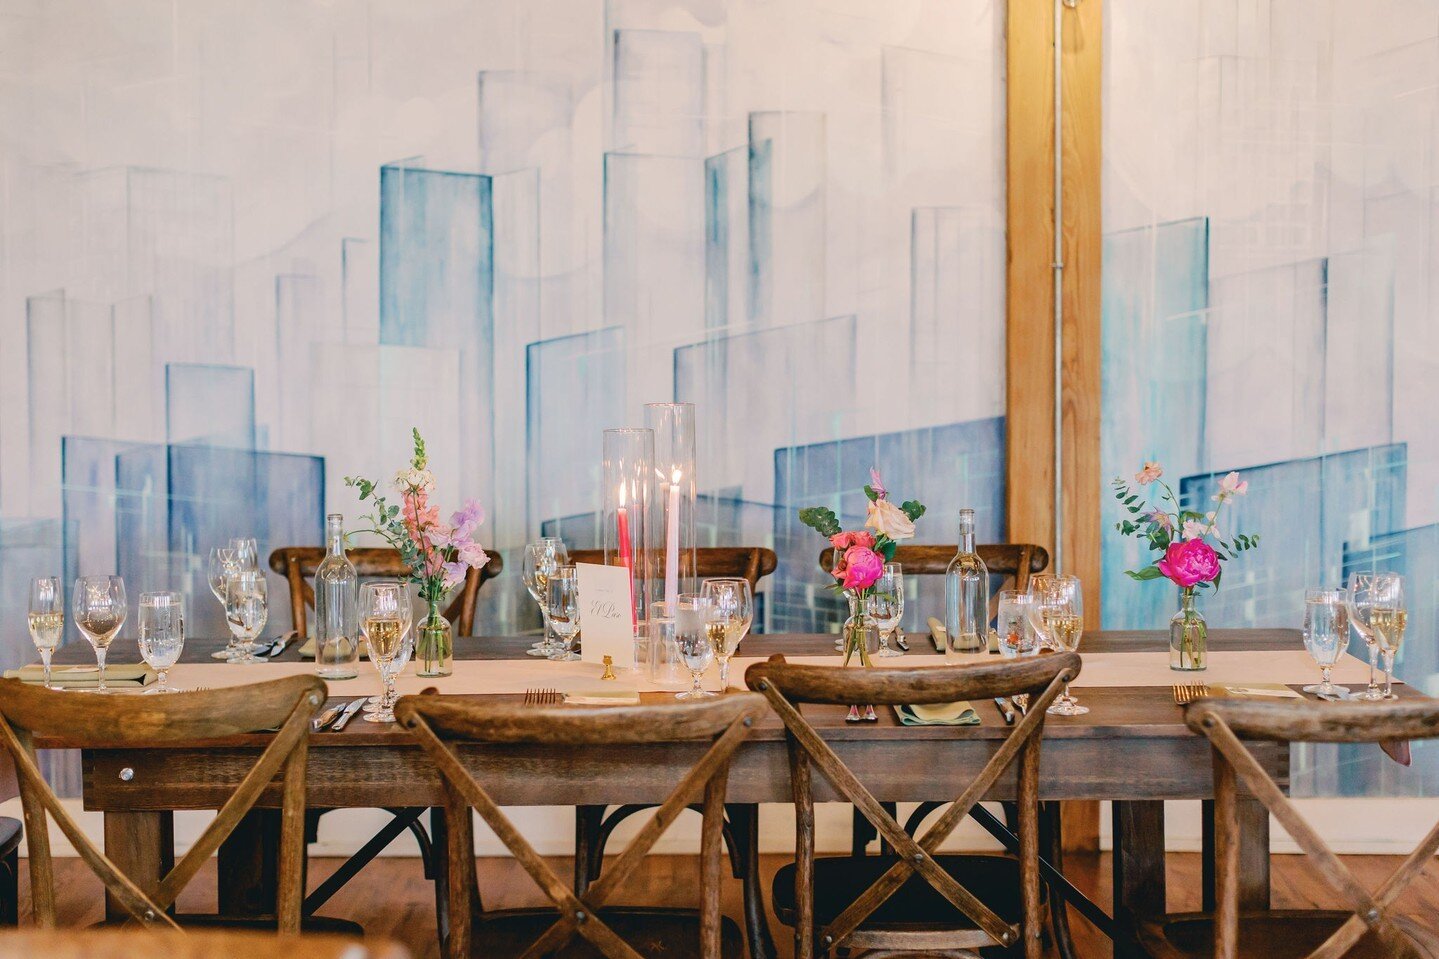 Another eye-catching mural around every corner of Lacuna 😍

📸 armenteros.weddings
.
.
.
#lacunaevents #lacunalofts #chicagoeventvenue #weddingdesign #chicagowedding #weddingvenue #eventdecor #weddingday #chicagoweddingvenue #eventdesign #realweddin